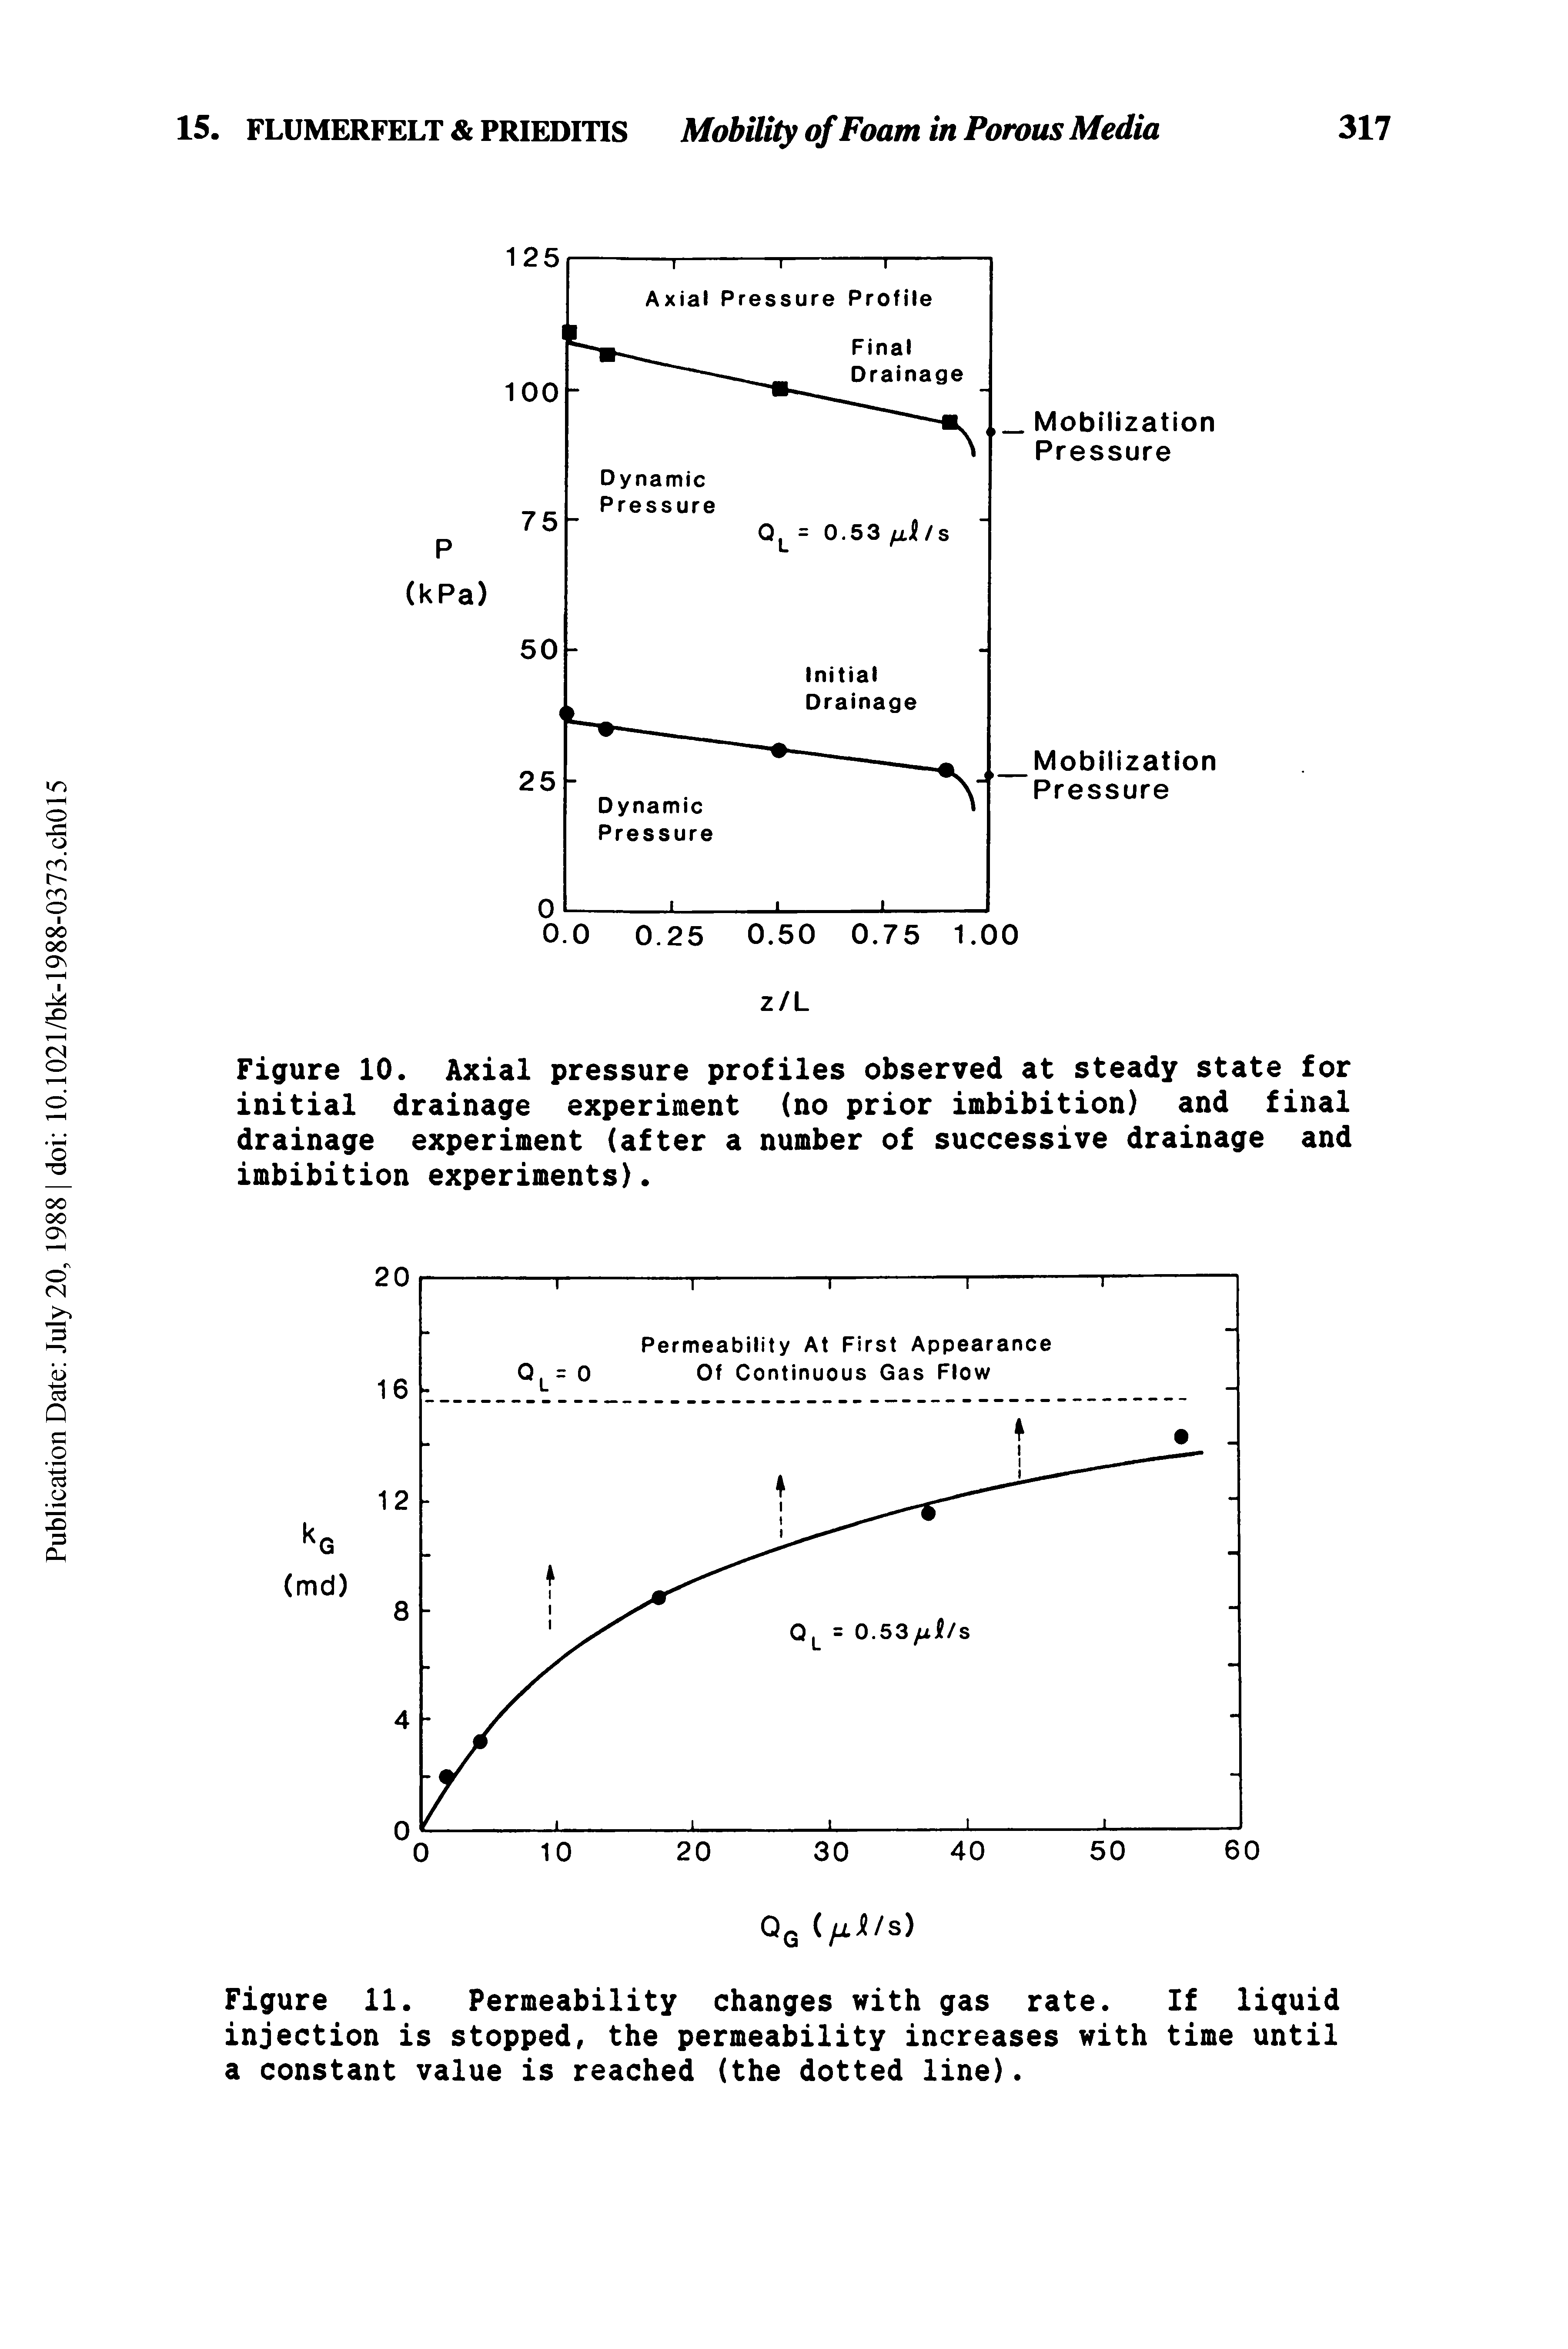 Figure 10. Axial pressure profiles observed at steady state for initial drainage experiment (no prior imbibition) and final drainage experiment (after a number of successive drainage and imbibition experiments).